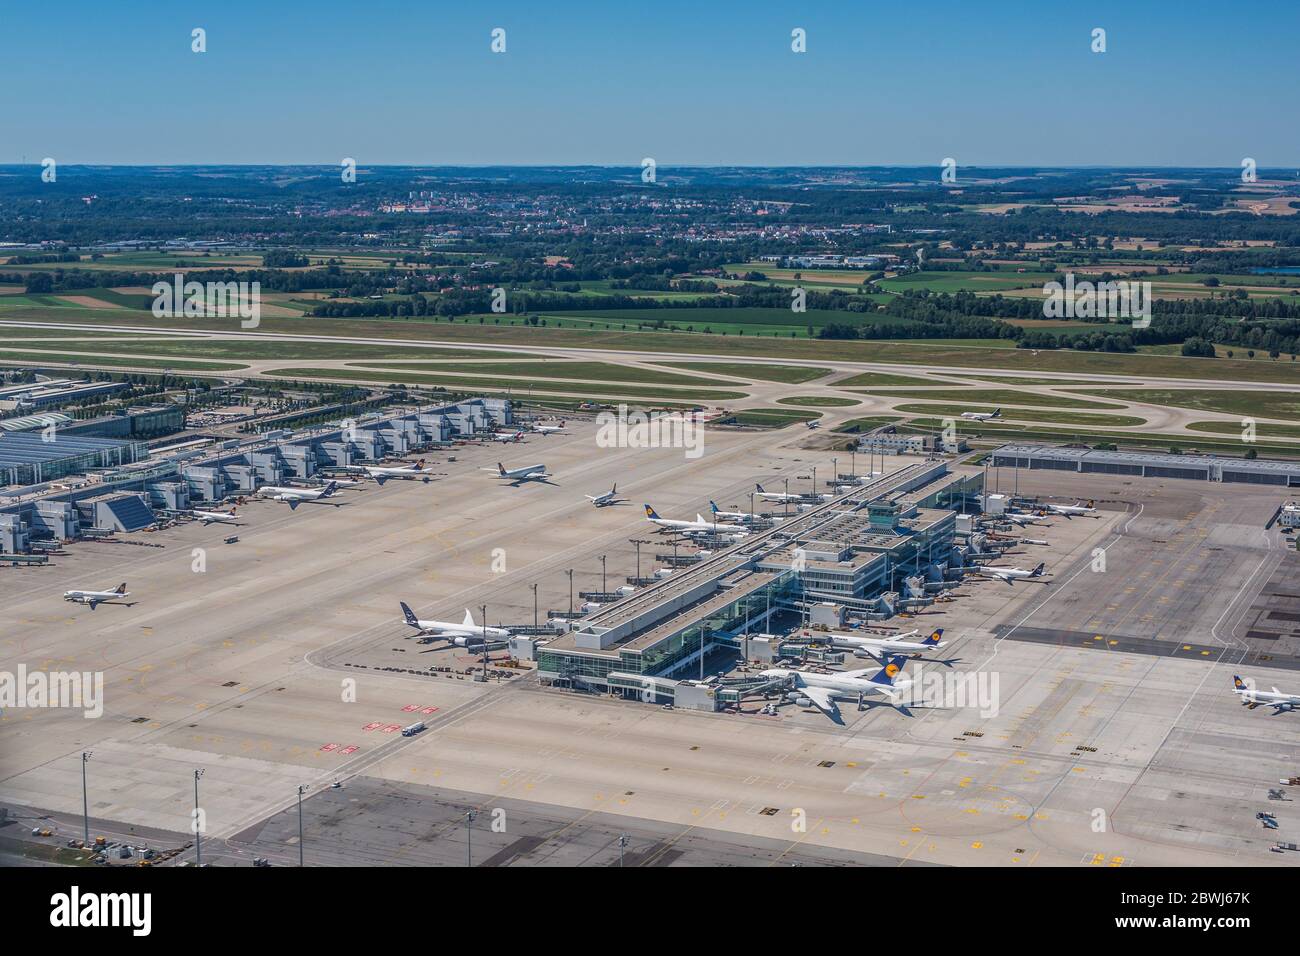 MUNICH, GERMANY - July 9. 2018: Aerial view of the Munich International airport (Flughafen Munchen) . It is the second busiest airport in Germany Stock Photo